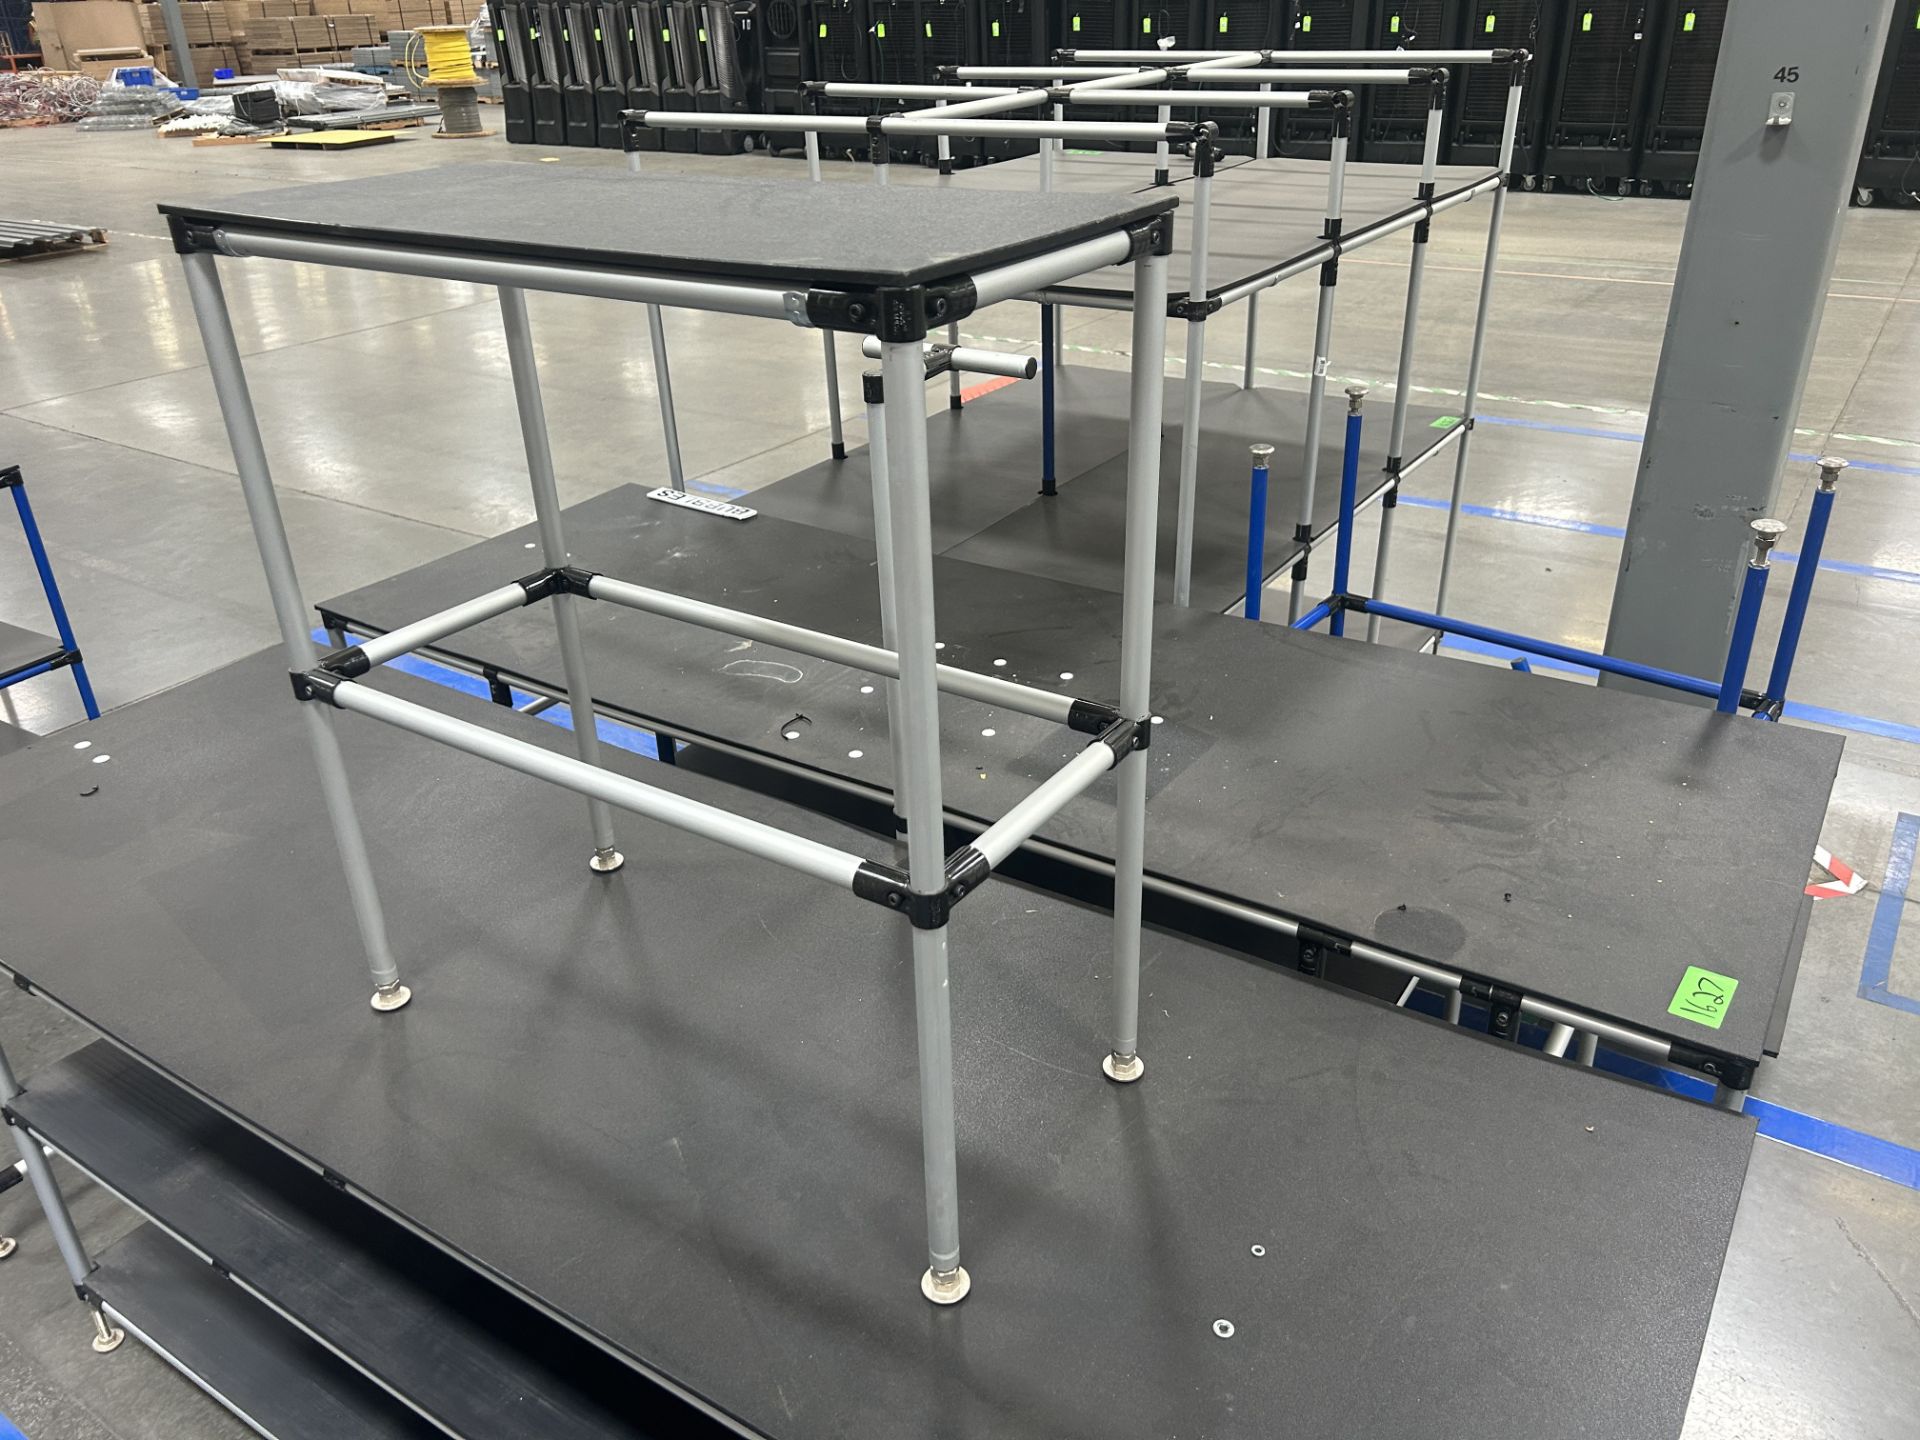 Shop Tables and Monitor Stand